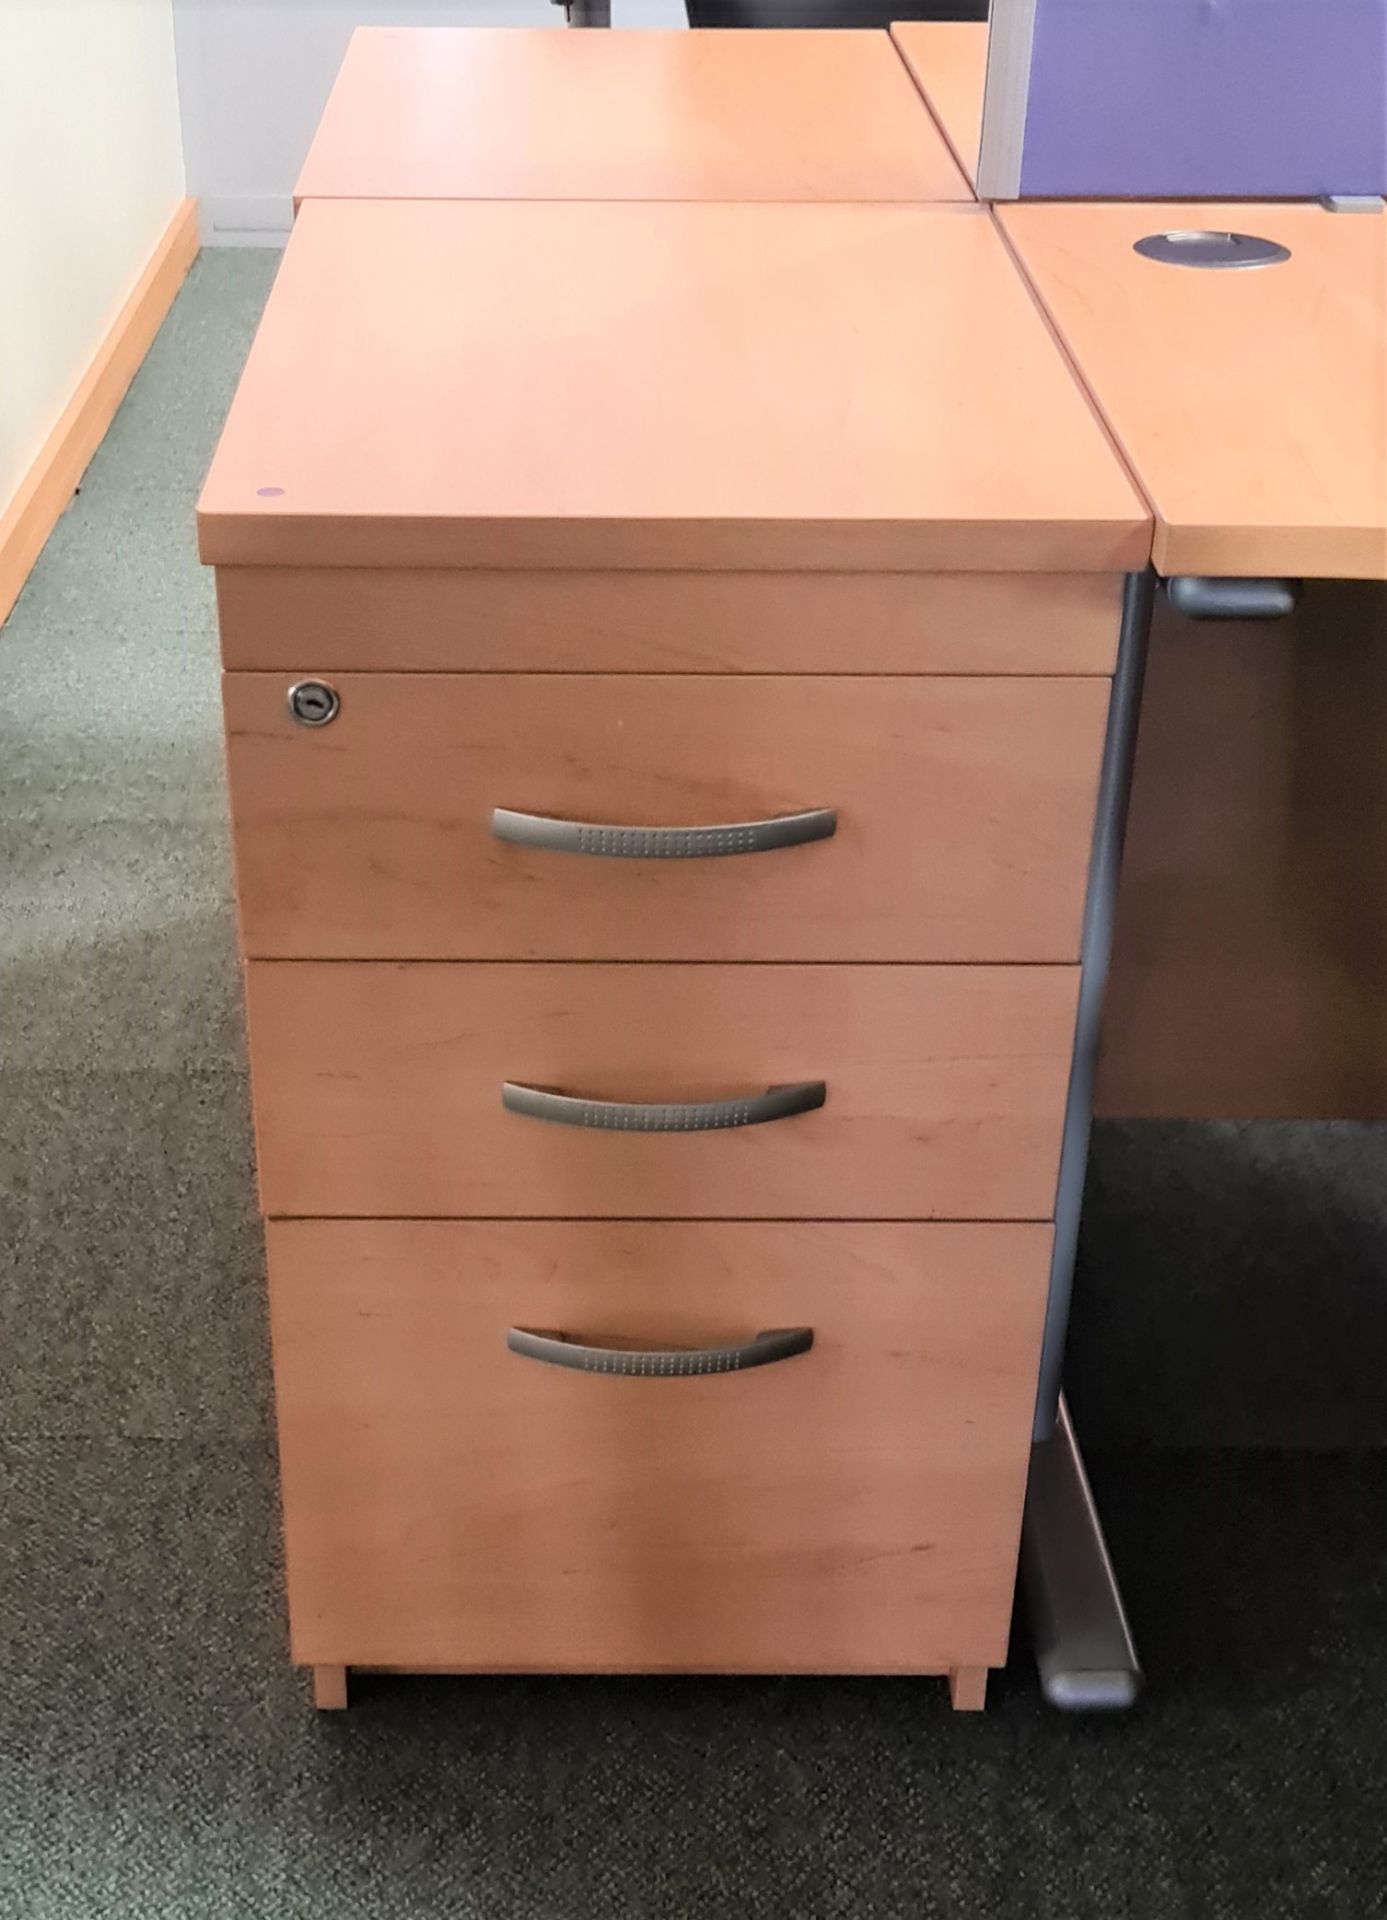 1 x Desk Height Three Drawer Pedestal With Beech Finish - Ref: 1 x AC005 - Location: Site 1,